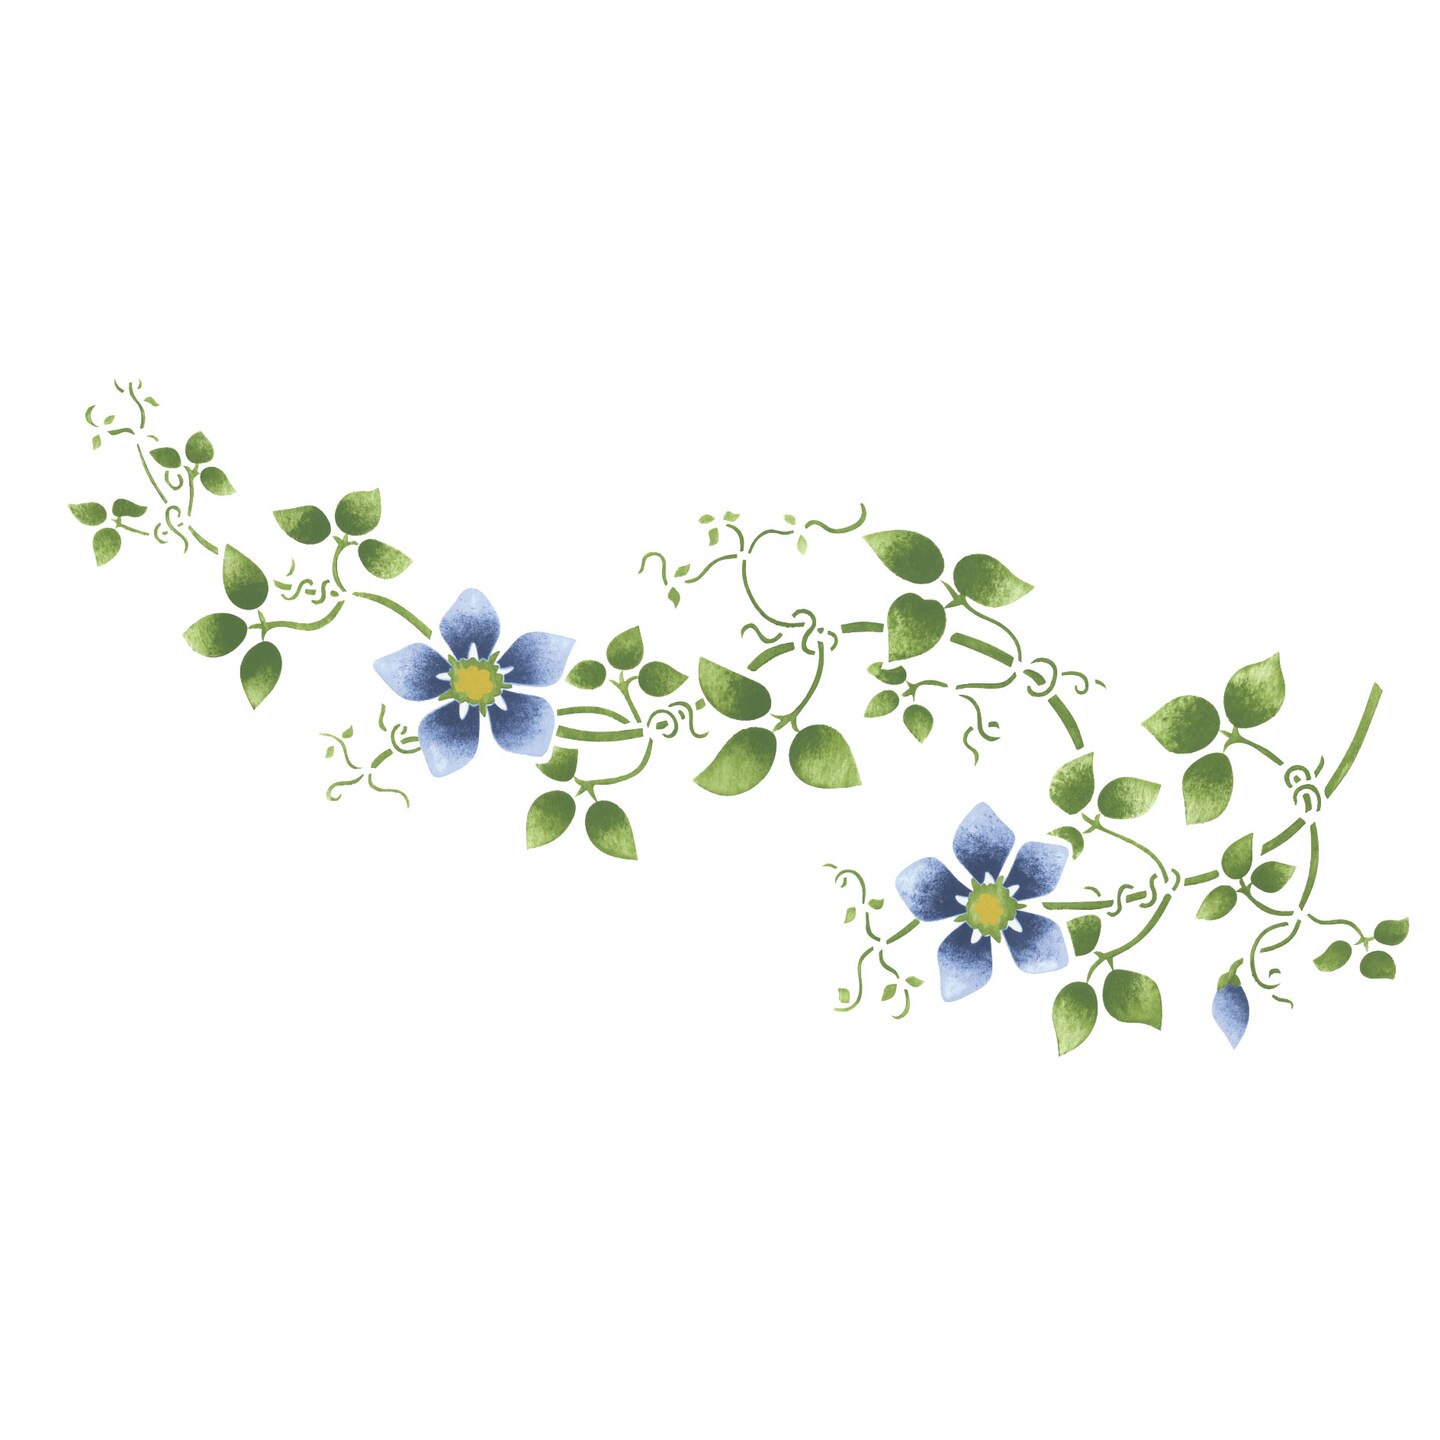 Large Clematis Flower Vine Wall Stencil | 1483 by Designer Stencils | Floral Stencils | Reusable Art Craft Stencils for Painting on Walls, Canvas, Wood | Reusable Plastic Paint Stencil for Home Makeover | Easy to Use &#x26; Clean Art Stencil